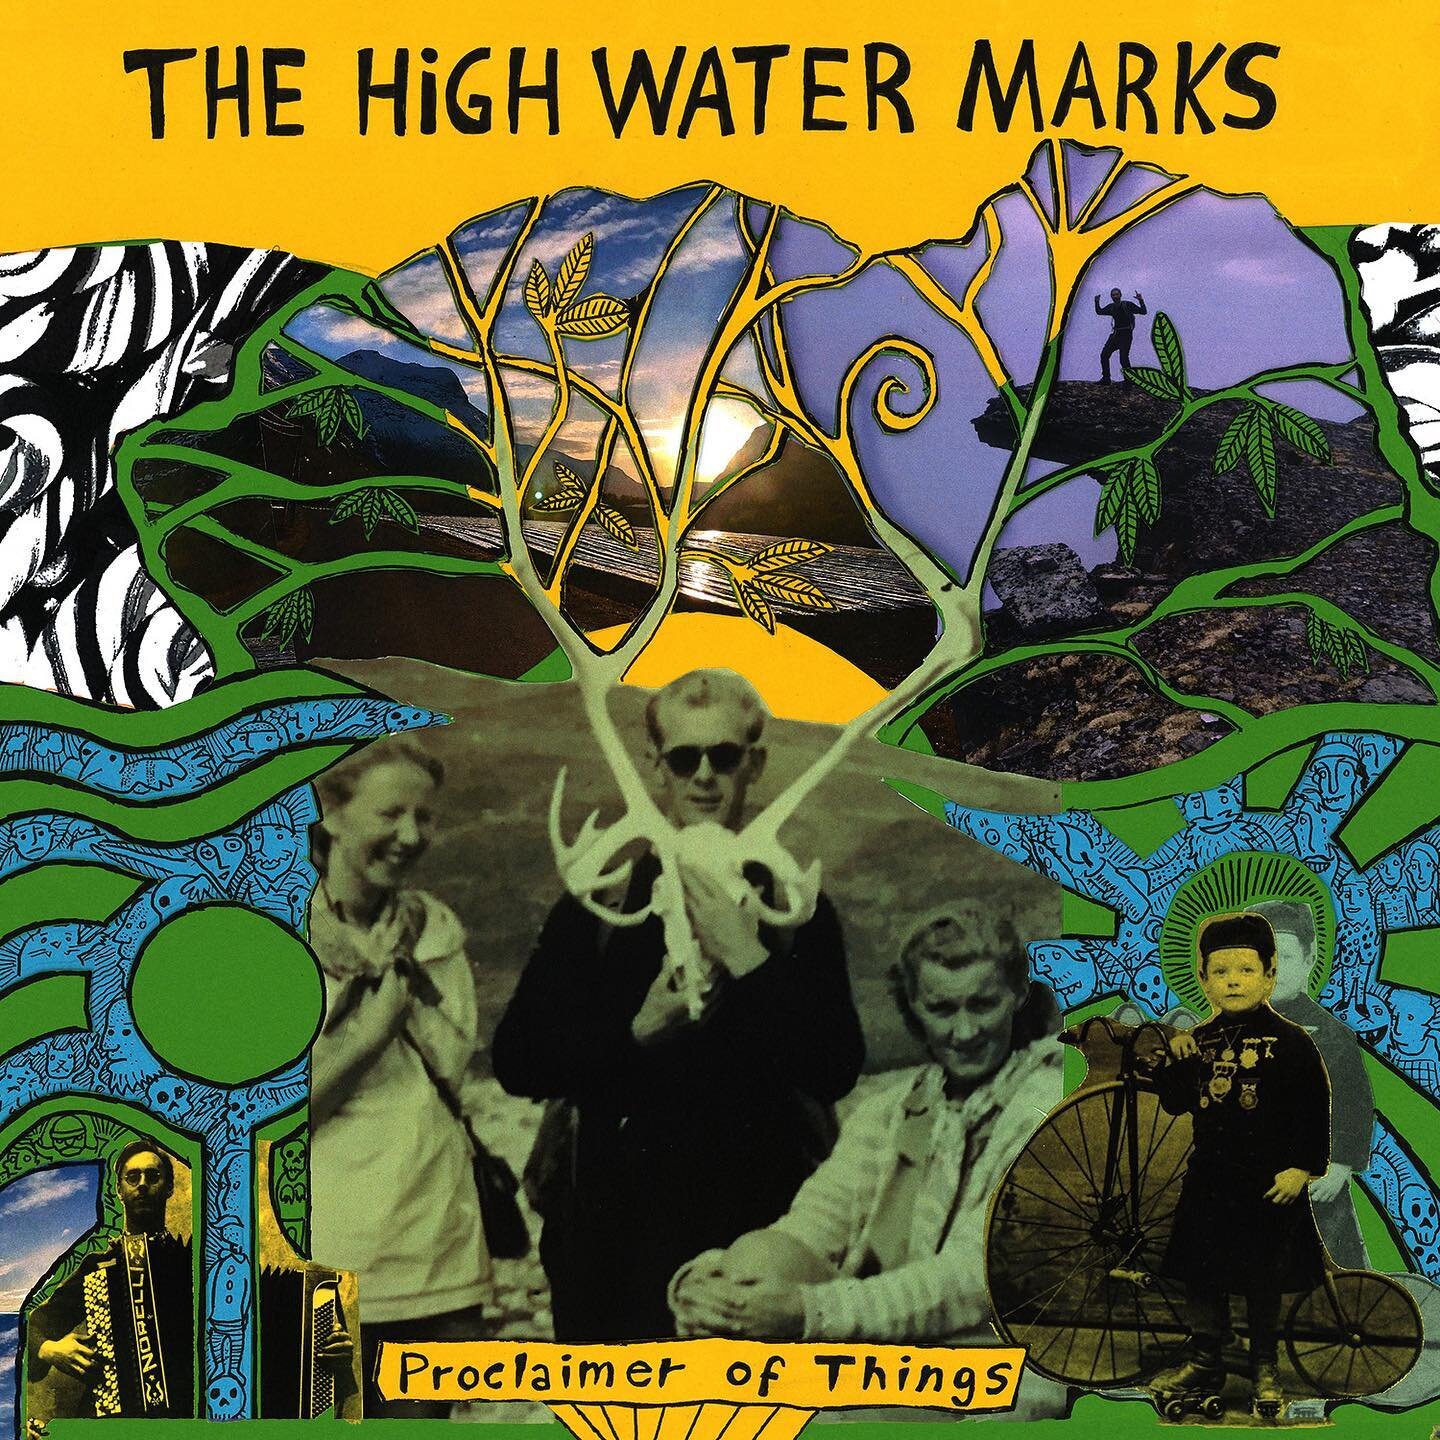 The new album I mixed for @thehighwatermarks is out today !! It&rsquo;s a really sweet record, equal parts bombastic and soft. My favourites are &lsquo;The Best Day&rsquo; and &lsquo;Someone&rsquo;s Song&rsquo;. 
.
.
.
.
#thehighwatermarks #elephant6